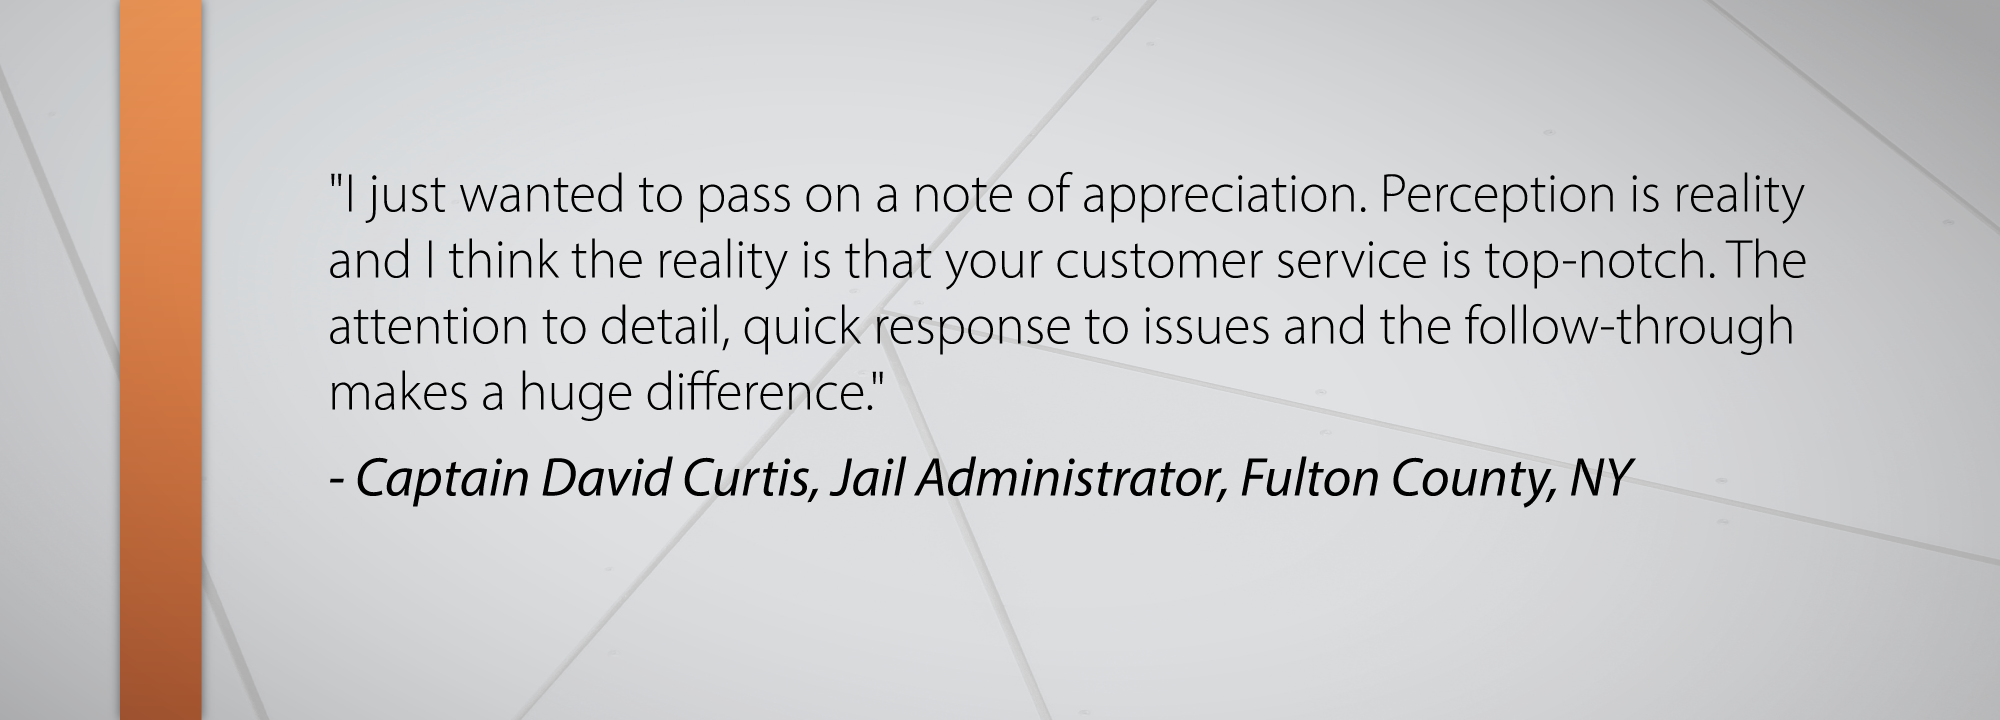 I just wanted to pass on a note of appreciation. Perception is reality and I think the reality is that your customer service is top-notch. The attention to detail, quick response to issues and the follow-through makes a huge difference. - Captain David Curtis Jail Administrator, Fulton County Sheriff’s Office